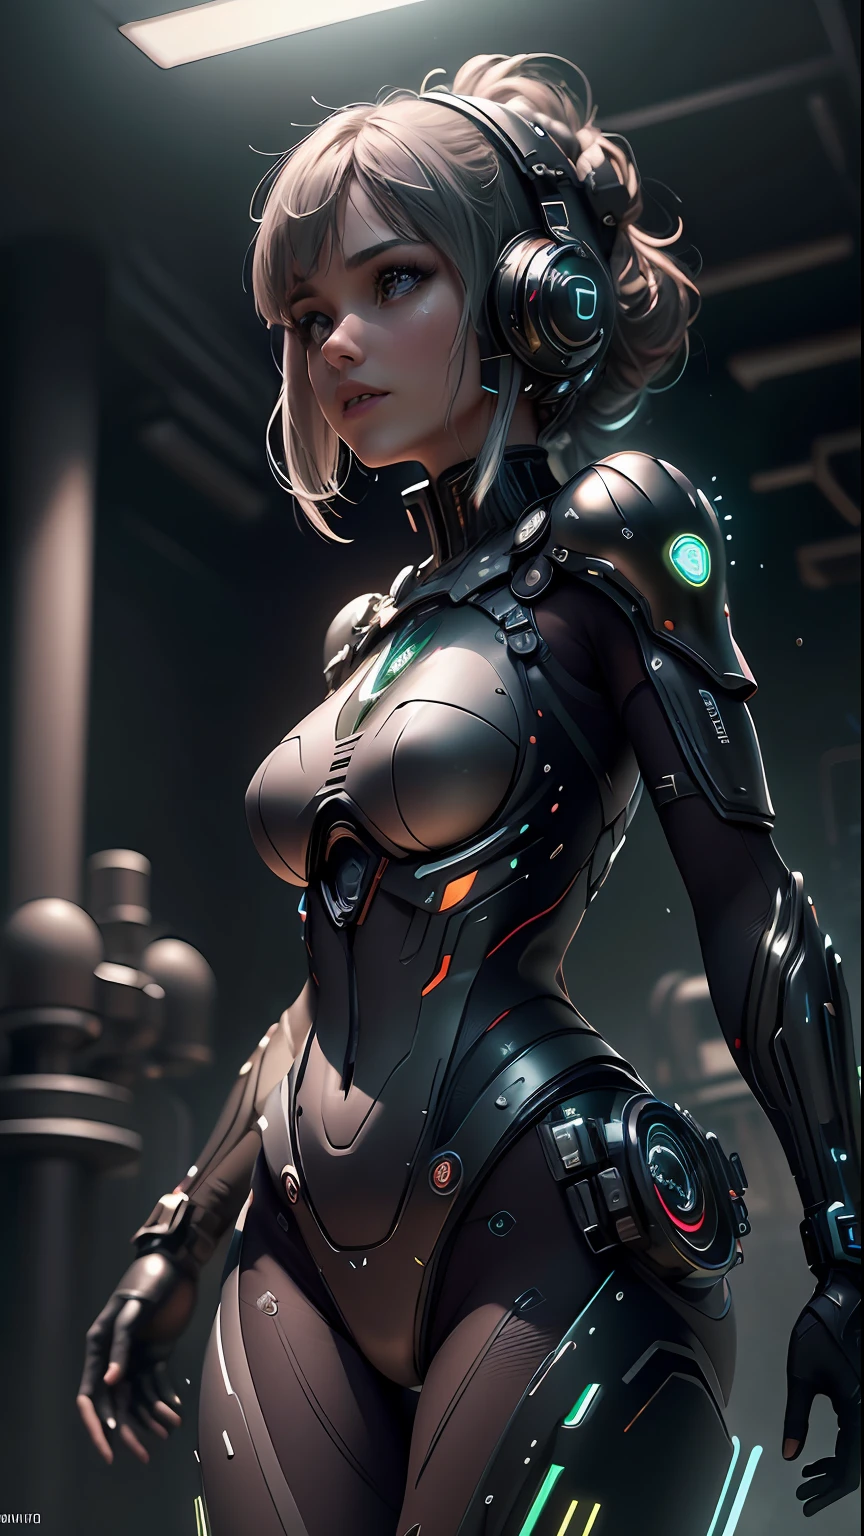 ((best qualityer)), ((Masterpiece artwork)), (detailded: 1.4), 3d, an image of a beautiful cyberpunk woman with thick, voluminous hair, deep decolte, gigante breasts, light particules, anti-technology pure energy chaos, HDR (High Dynamic Range), Ray Tracing ,nvidia RTX,Super Resolution,Unreal 5,Subsurface dispersion,PBR Texture,Post-processing,anisotropic filtering,Depth of field,Maximum clarity and sharpness,Multilayer textures,Albedo and specular maps,surface shading,Accurate Light-Material Interaction Simulation,perfectly proportions,octane render,dual-tone lighting,Wide opening,Low ISO,White balance,thirds rule,8K RAW